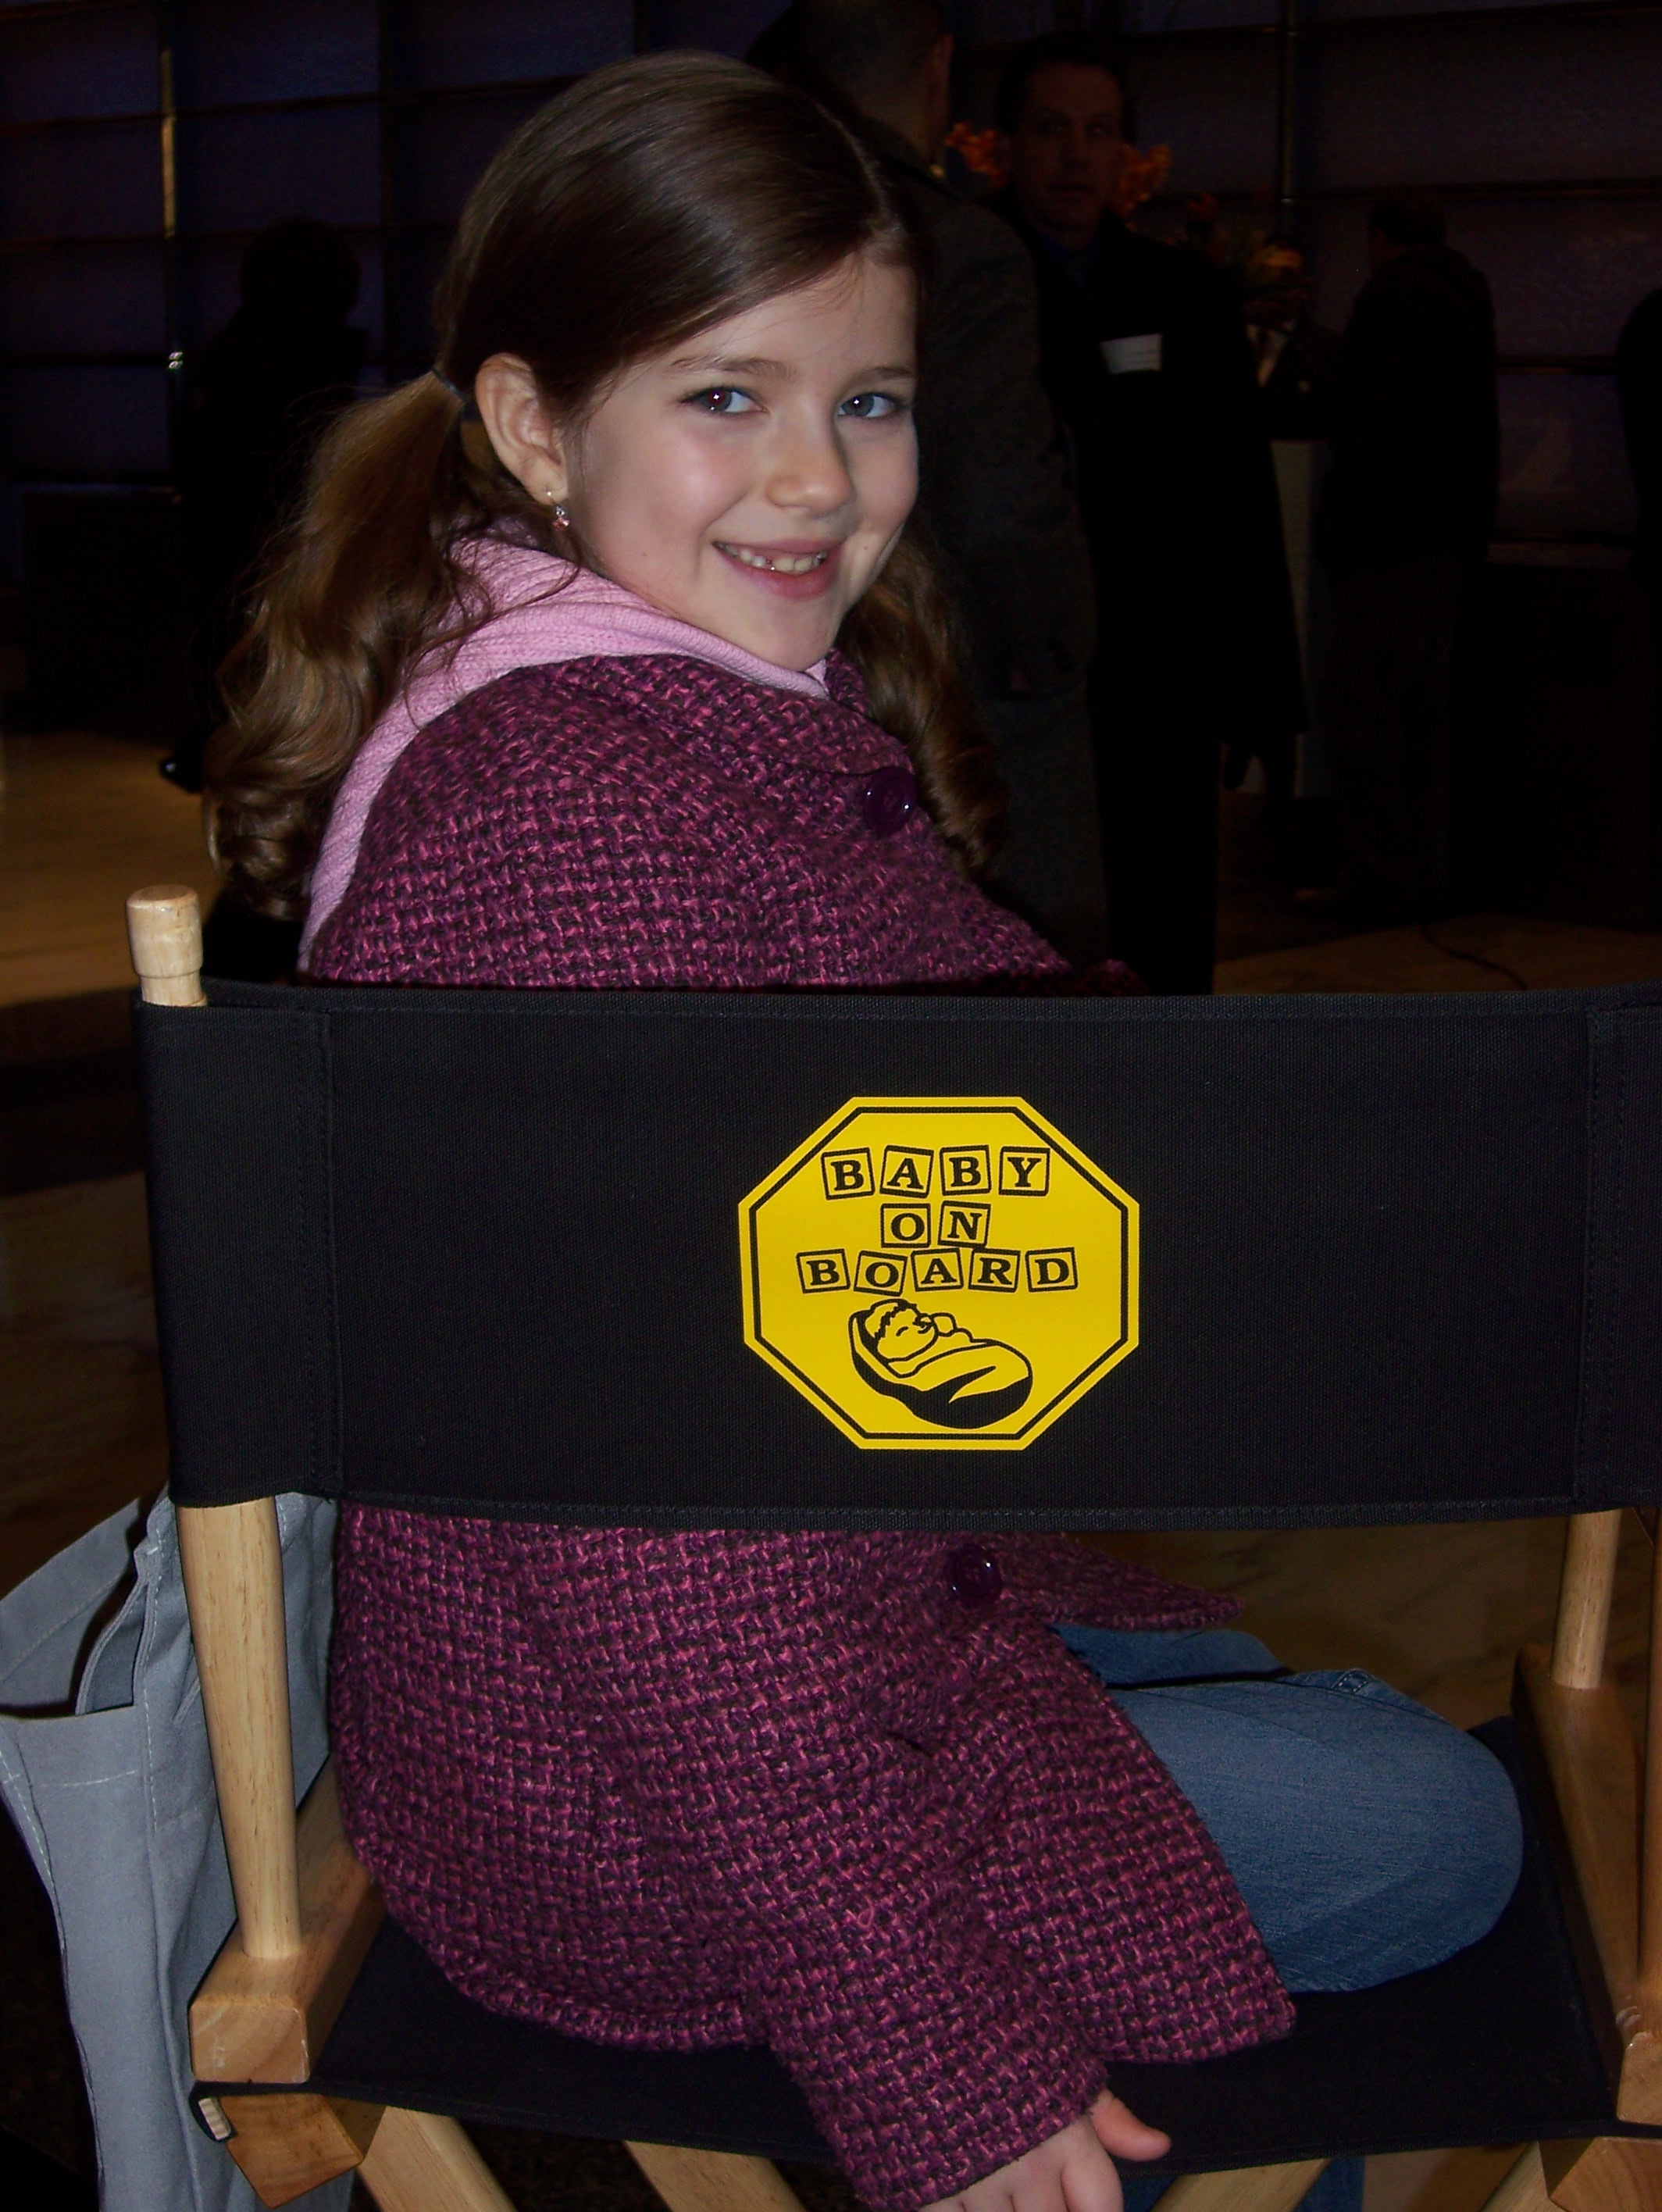 Baby on Board set